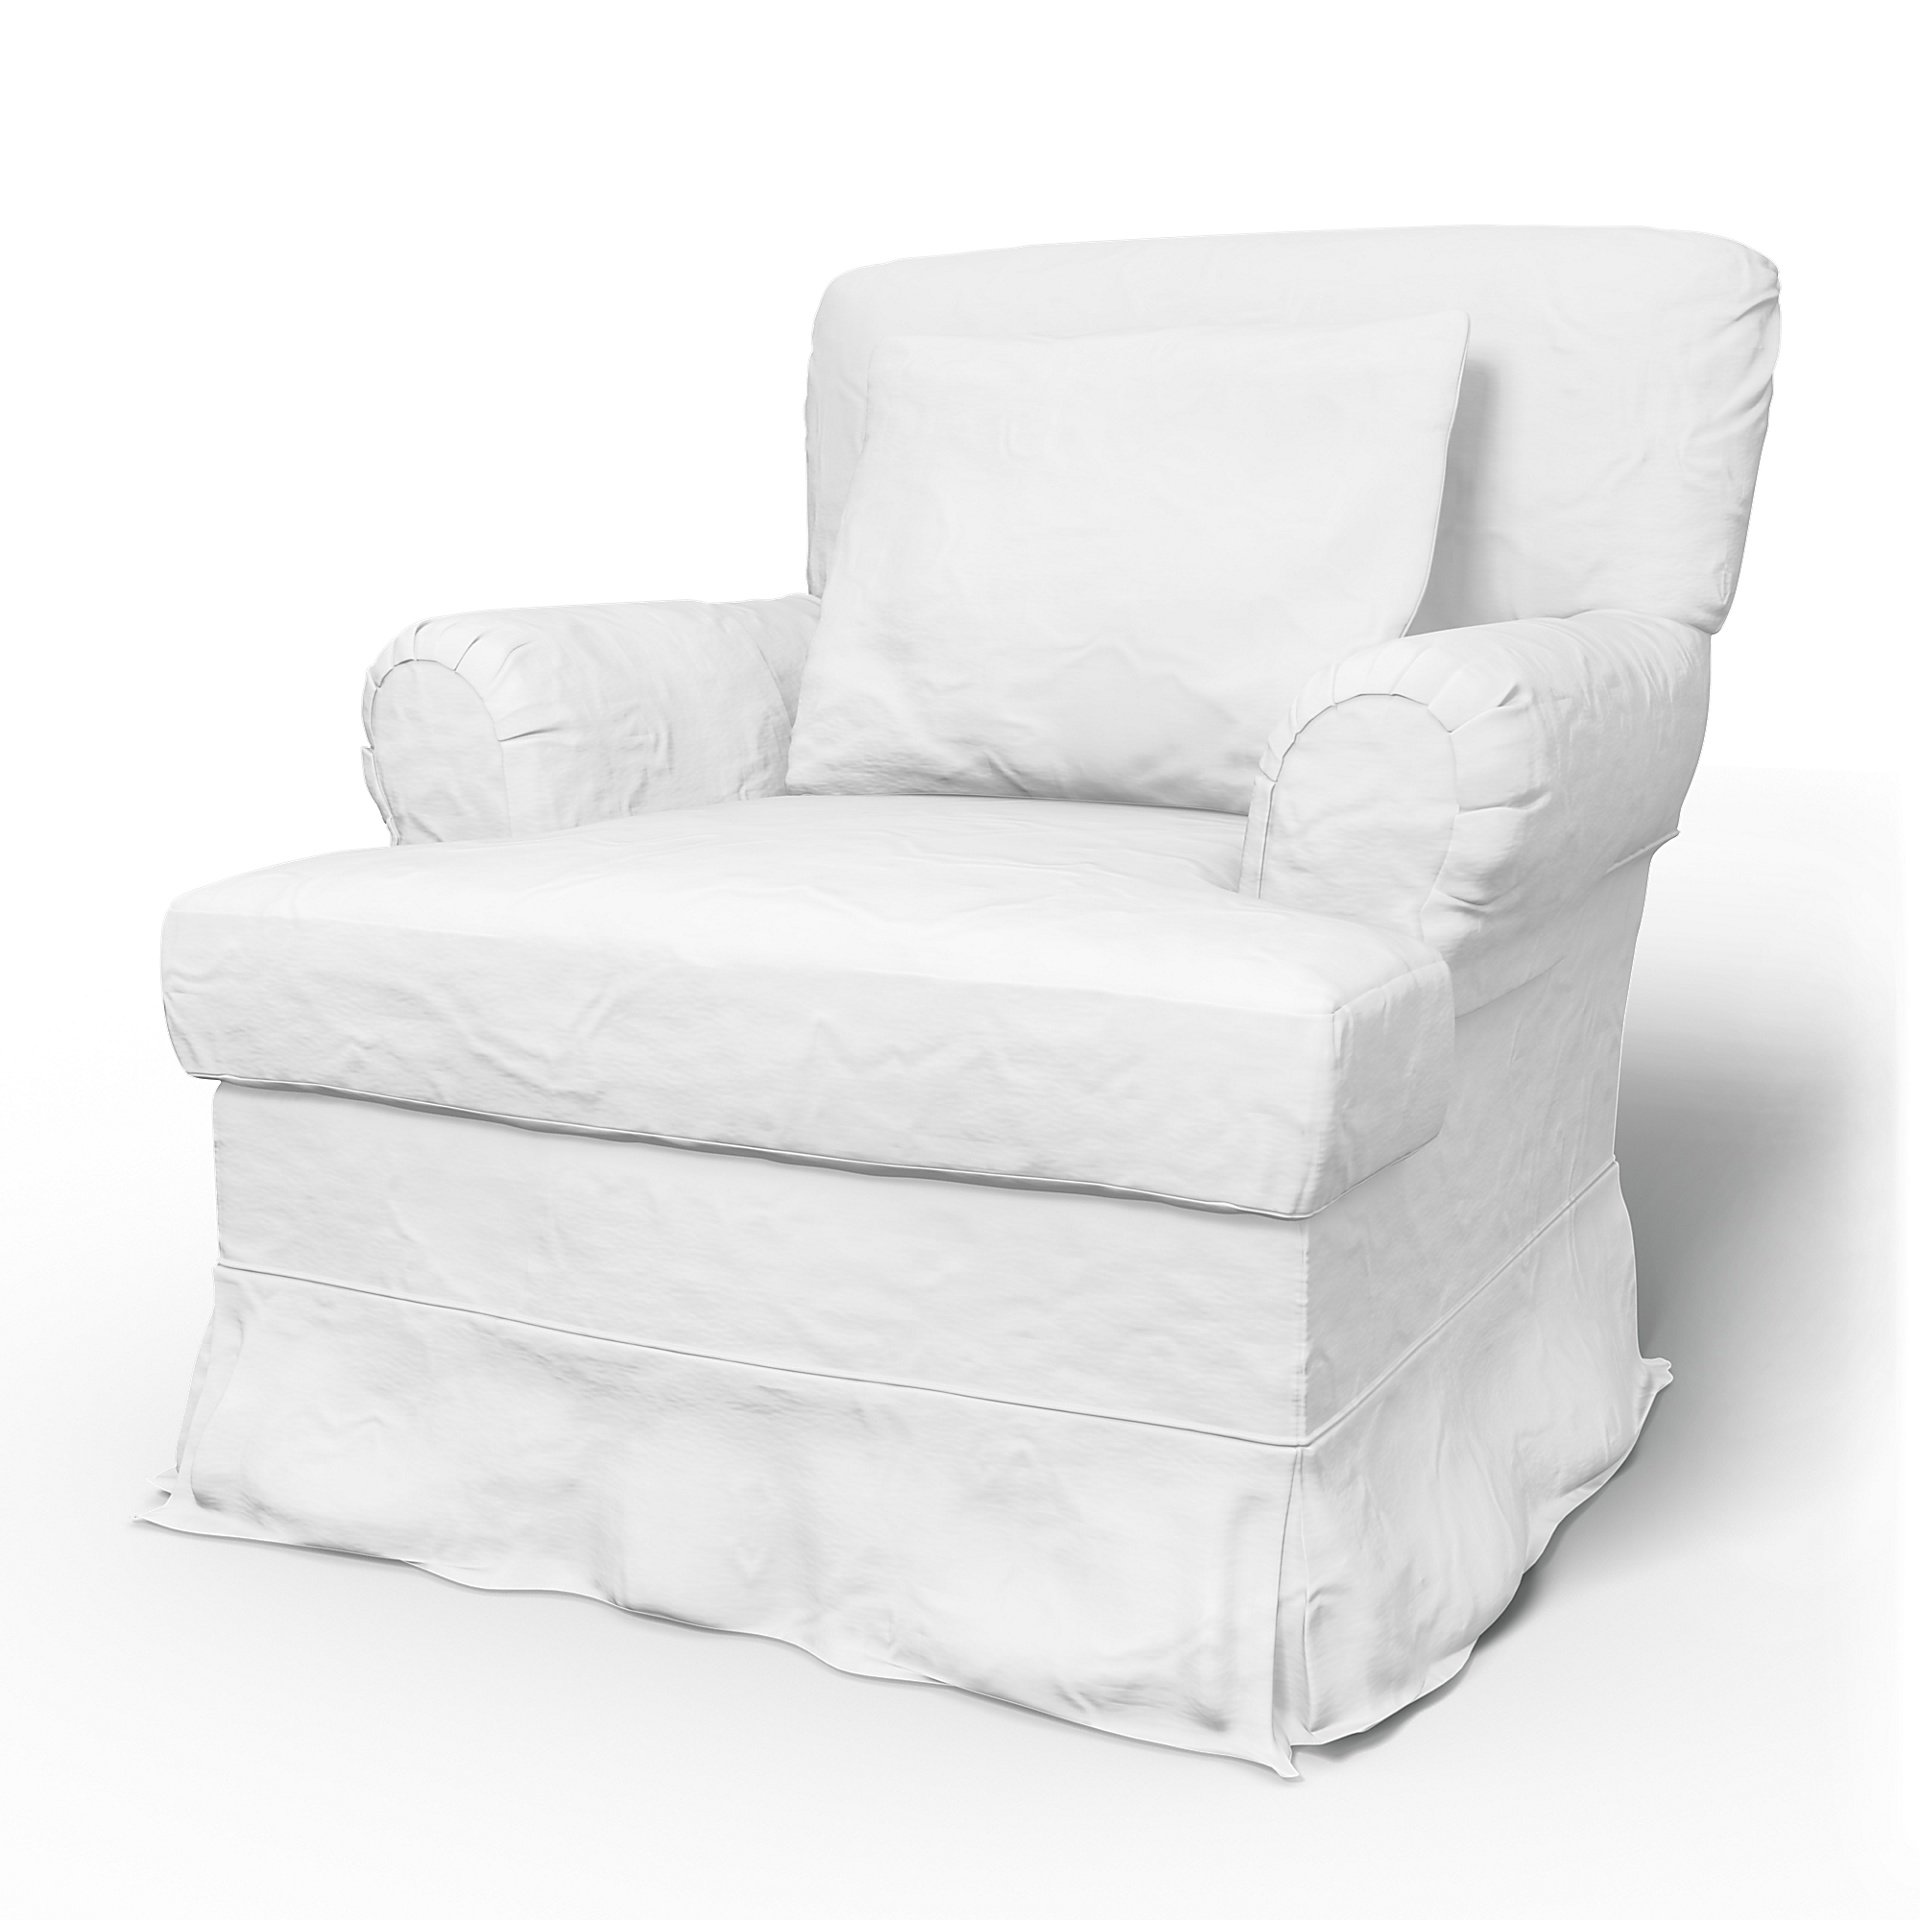 IKEA - Stockholm Armchair Cover (1994-2000), Absolute White, Linen - Bemz